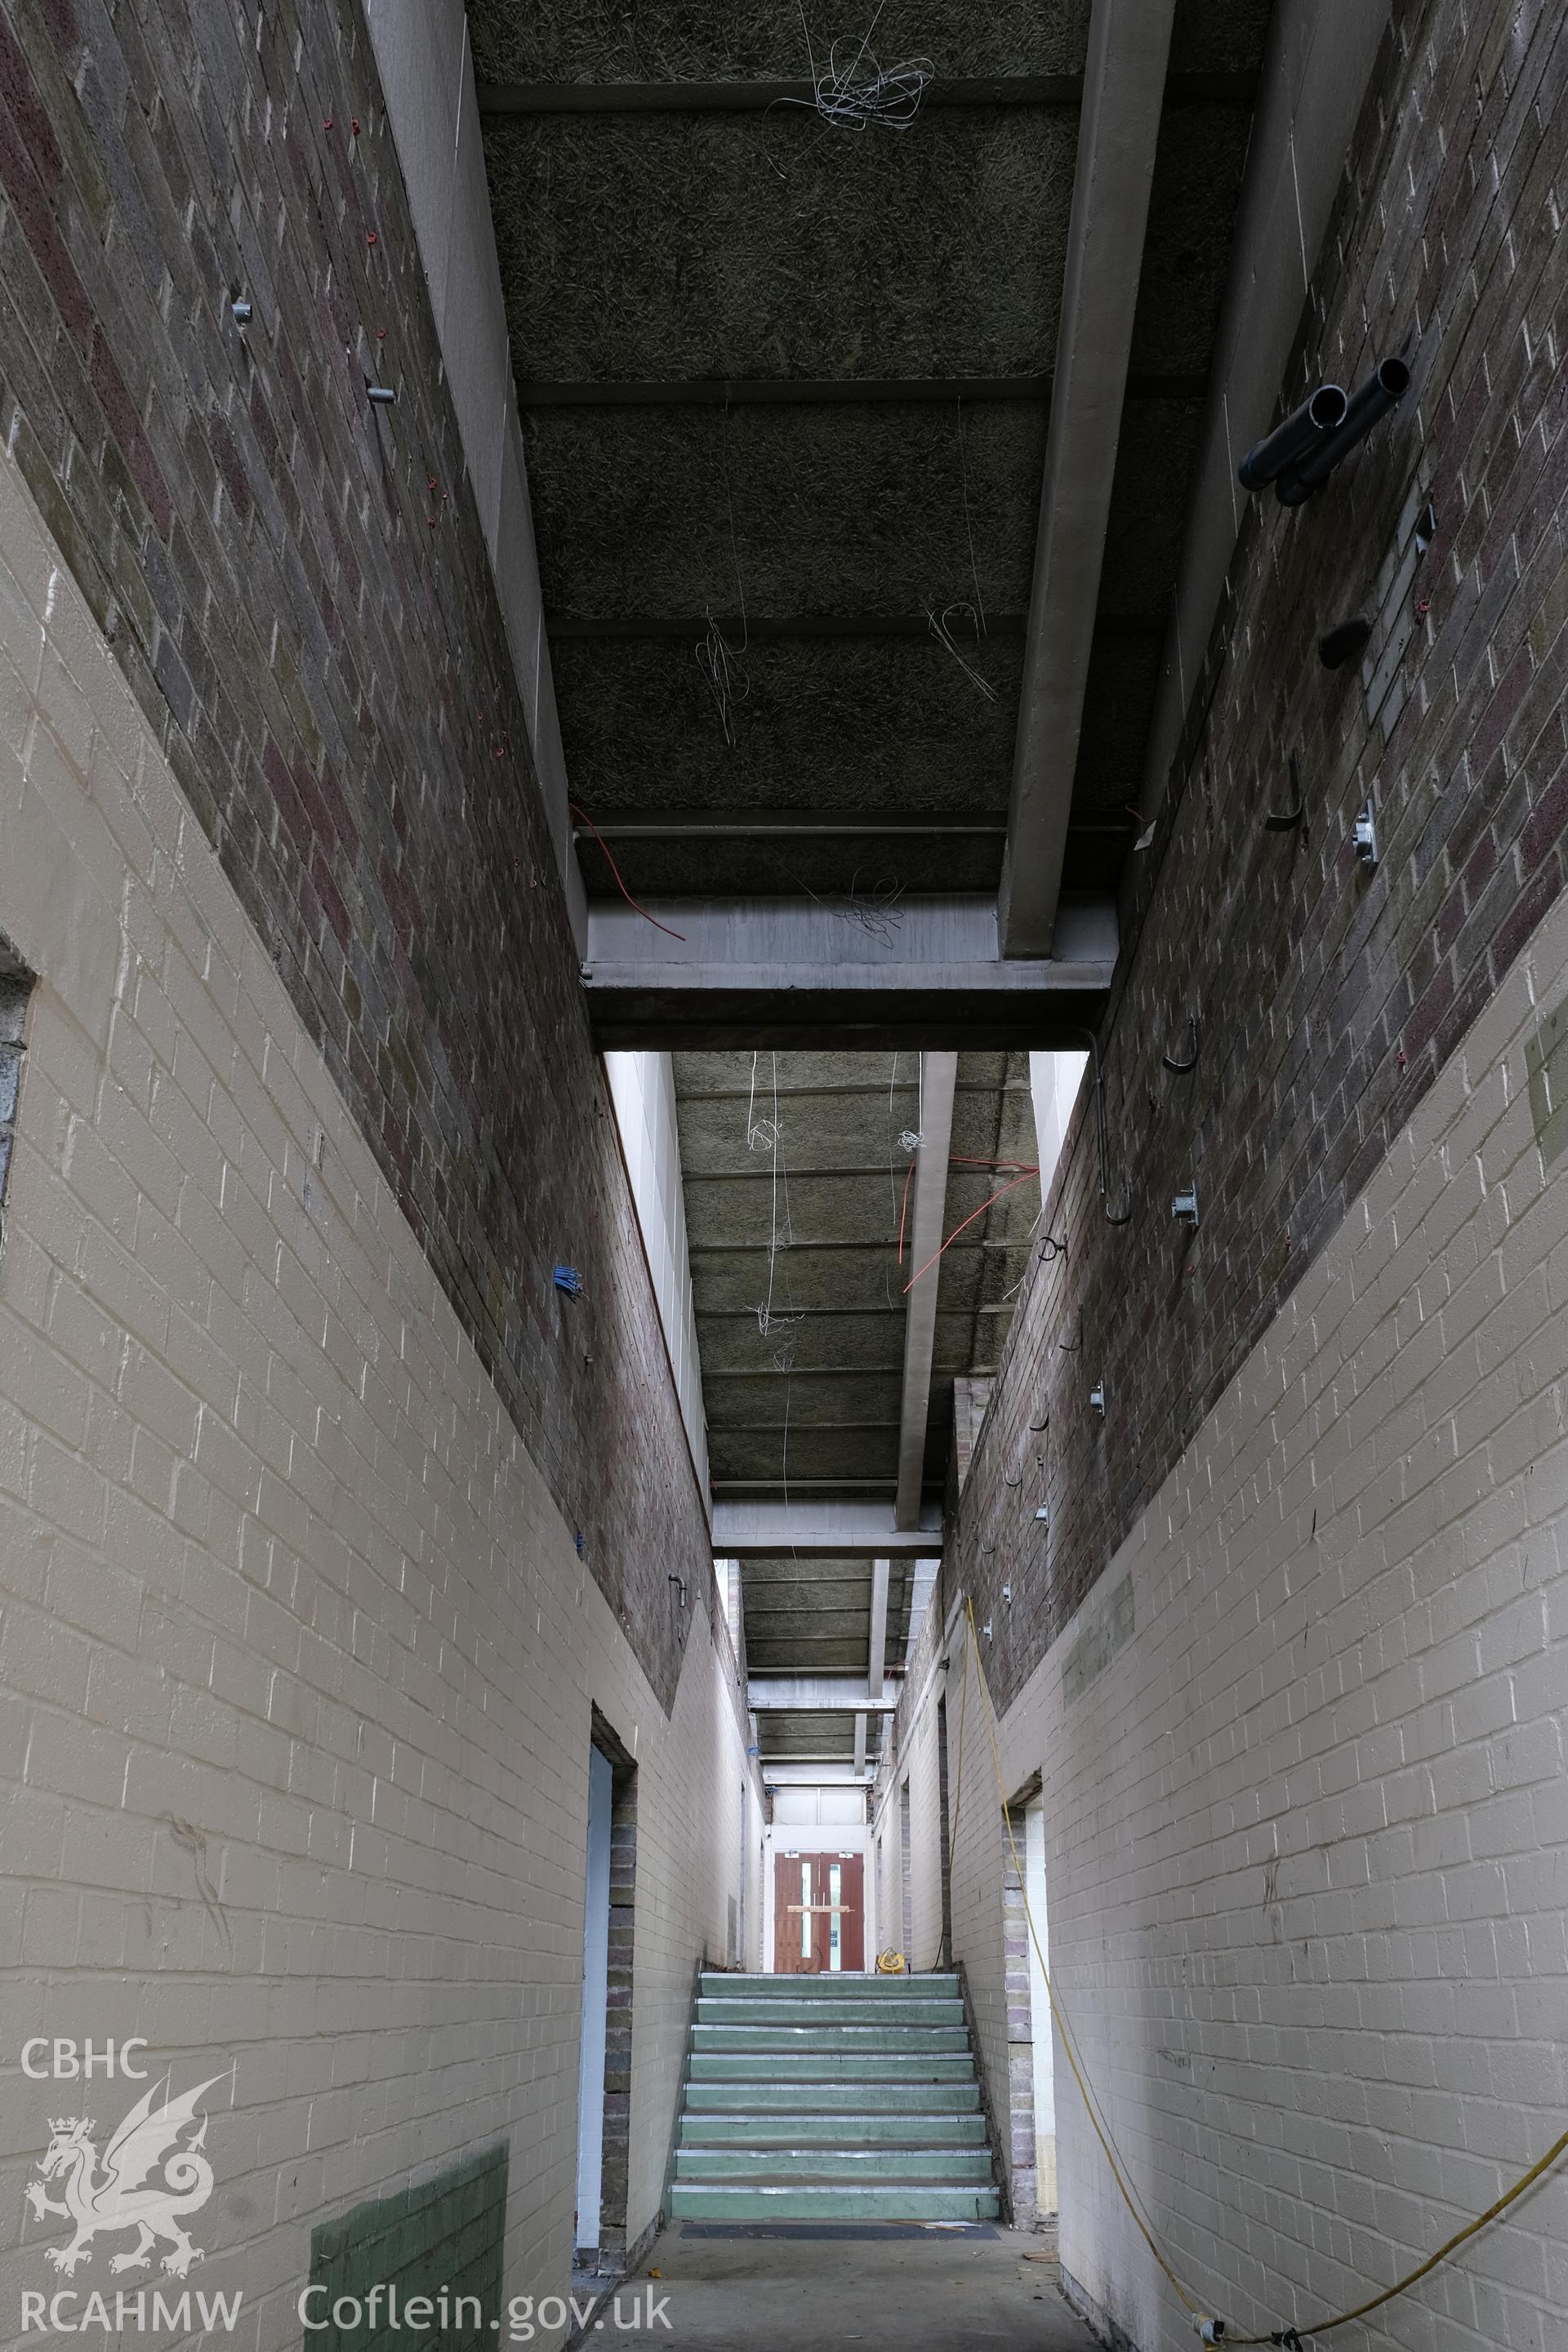 Digital colour photograph showing interior view of corridor at Caernarfonshire Technical College, Ffriddoedd Road, Bangor. Photographed by Dilys Morgan and donated by Wyn Thomas of Grwp Llandrillo-Menai Further Education College, 2019.